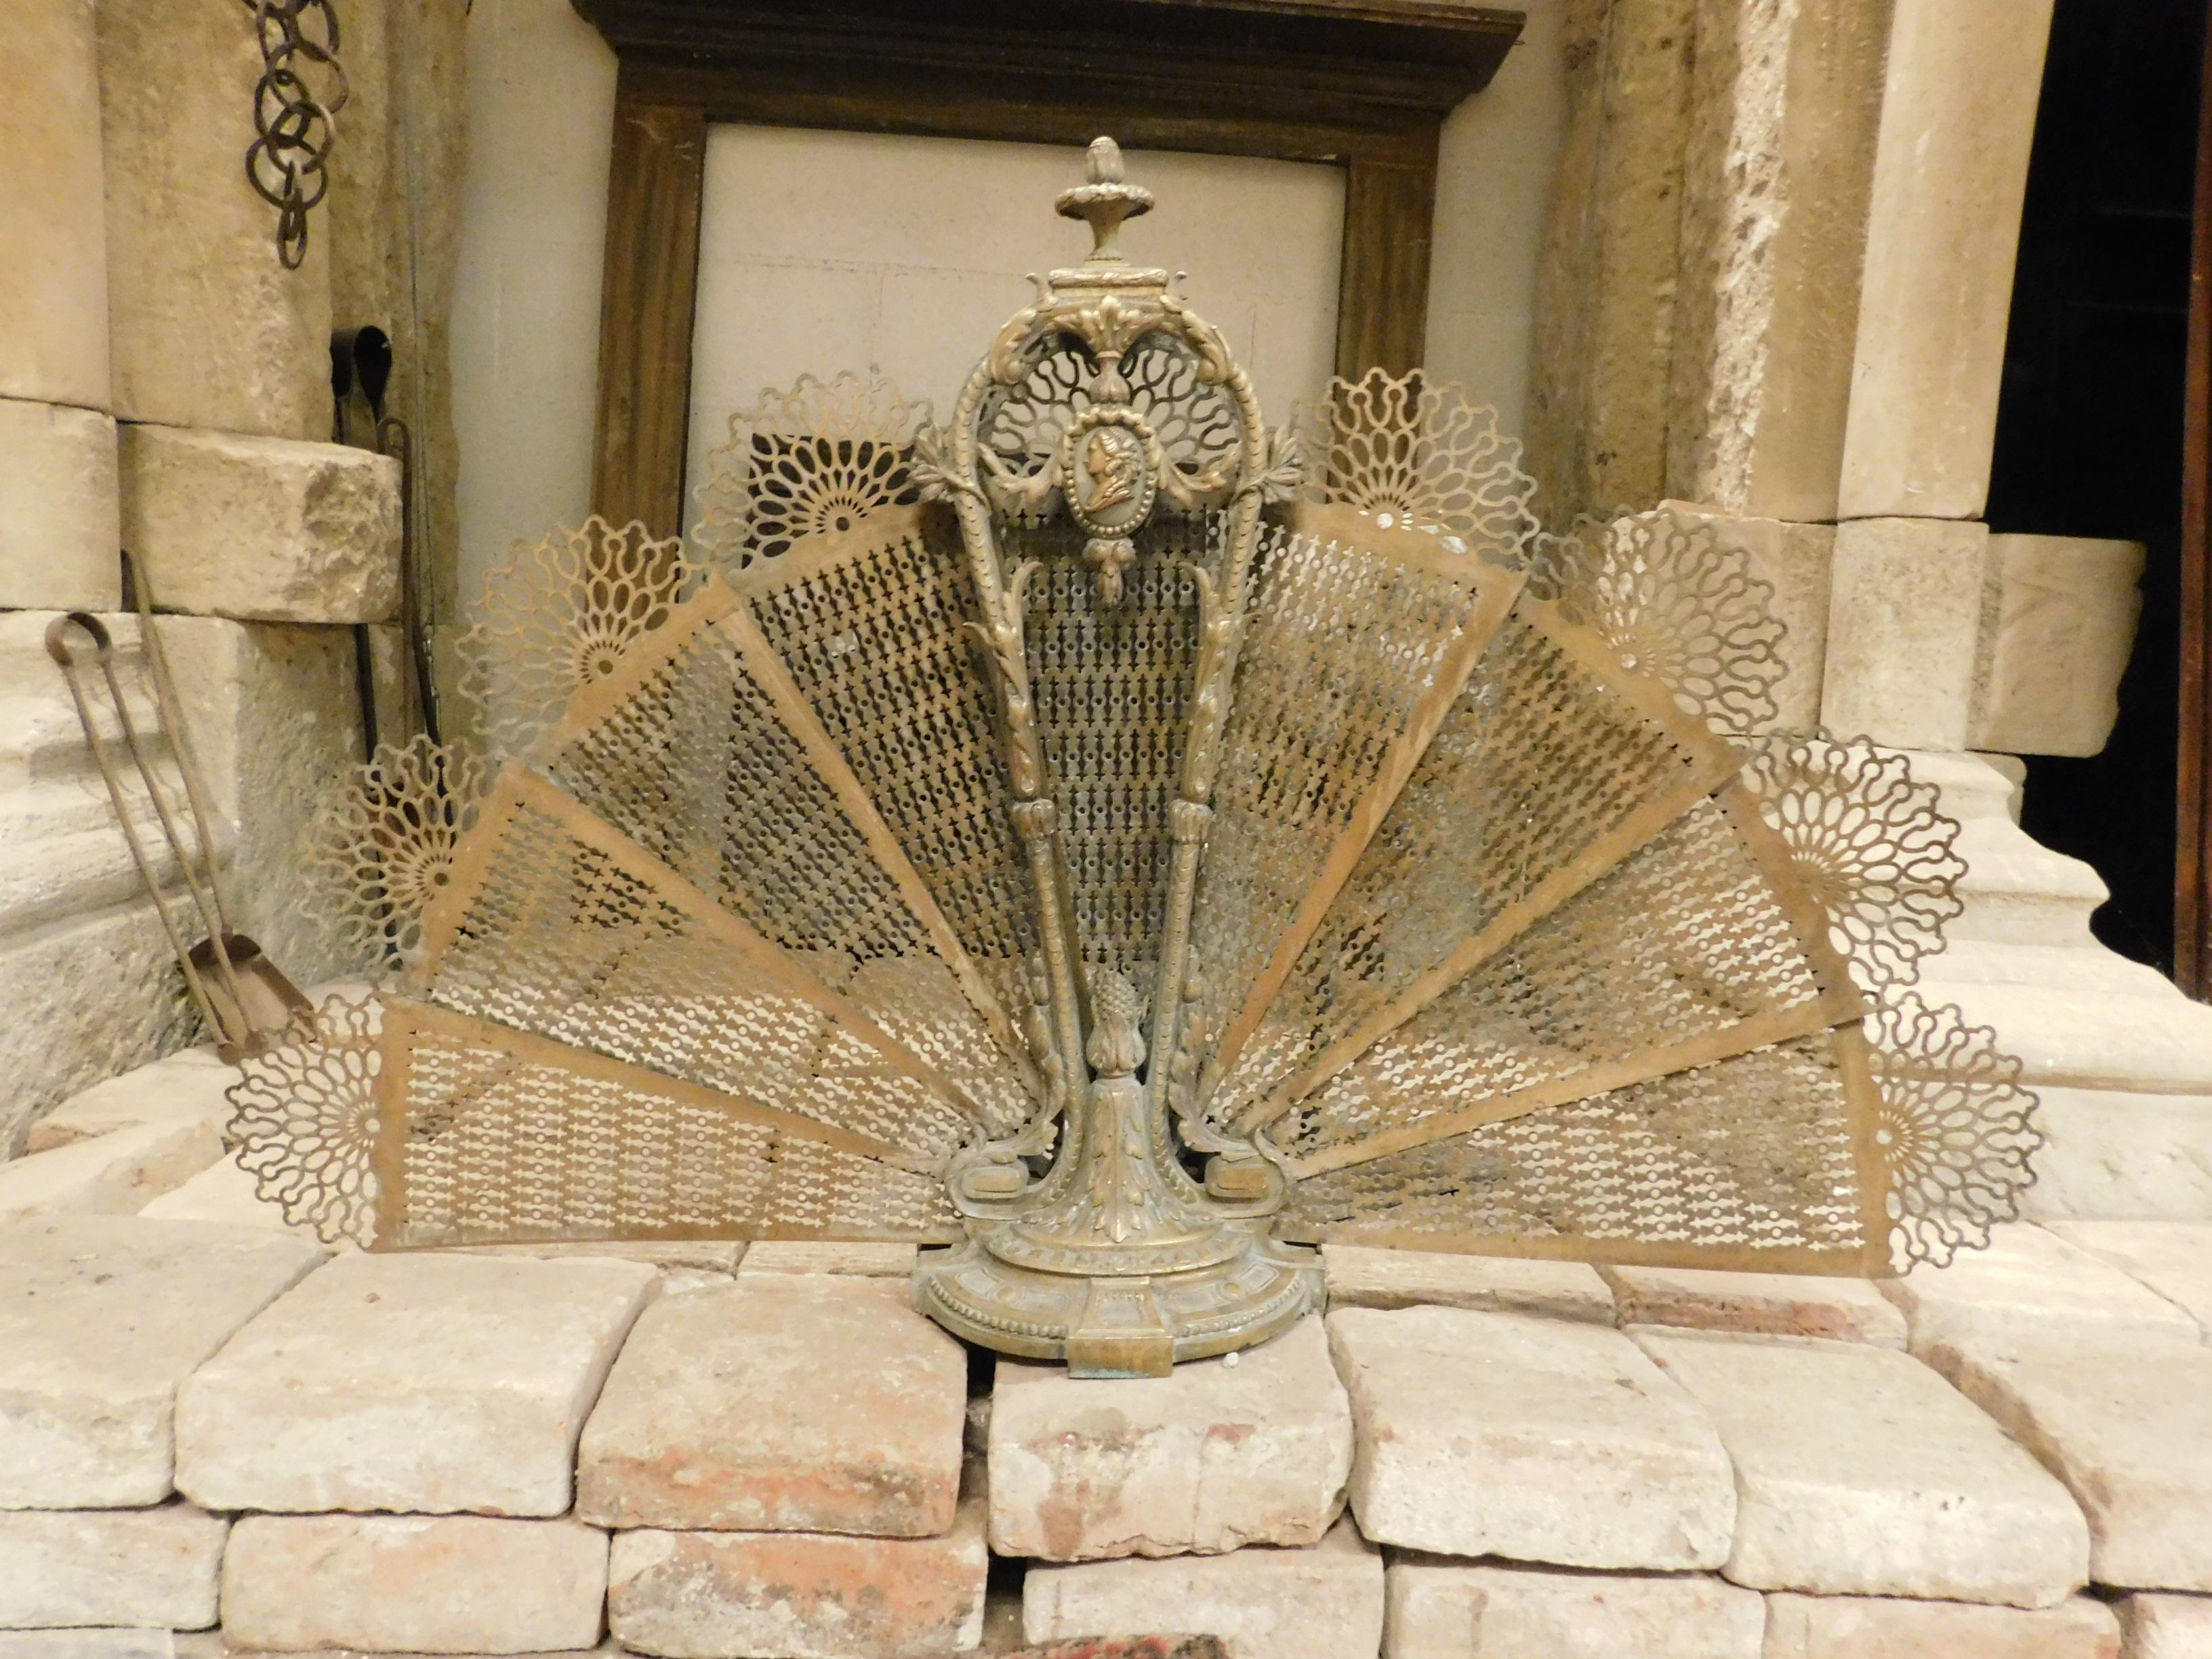 Antique fireplace screen, with peacock tail opening, hand-carved in shiny golden brass, from France, handmade in the 19th century, open size cm W 100 x H 66 x D base 20 cm.